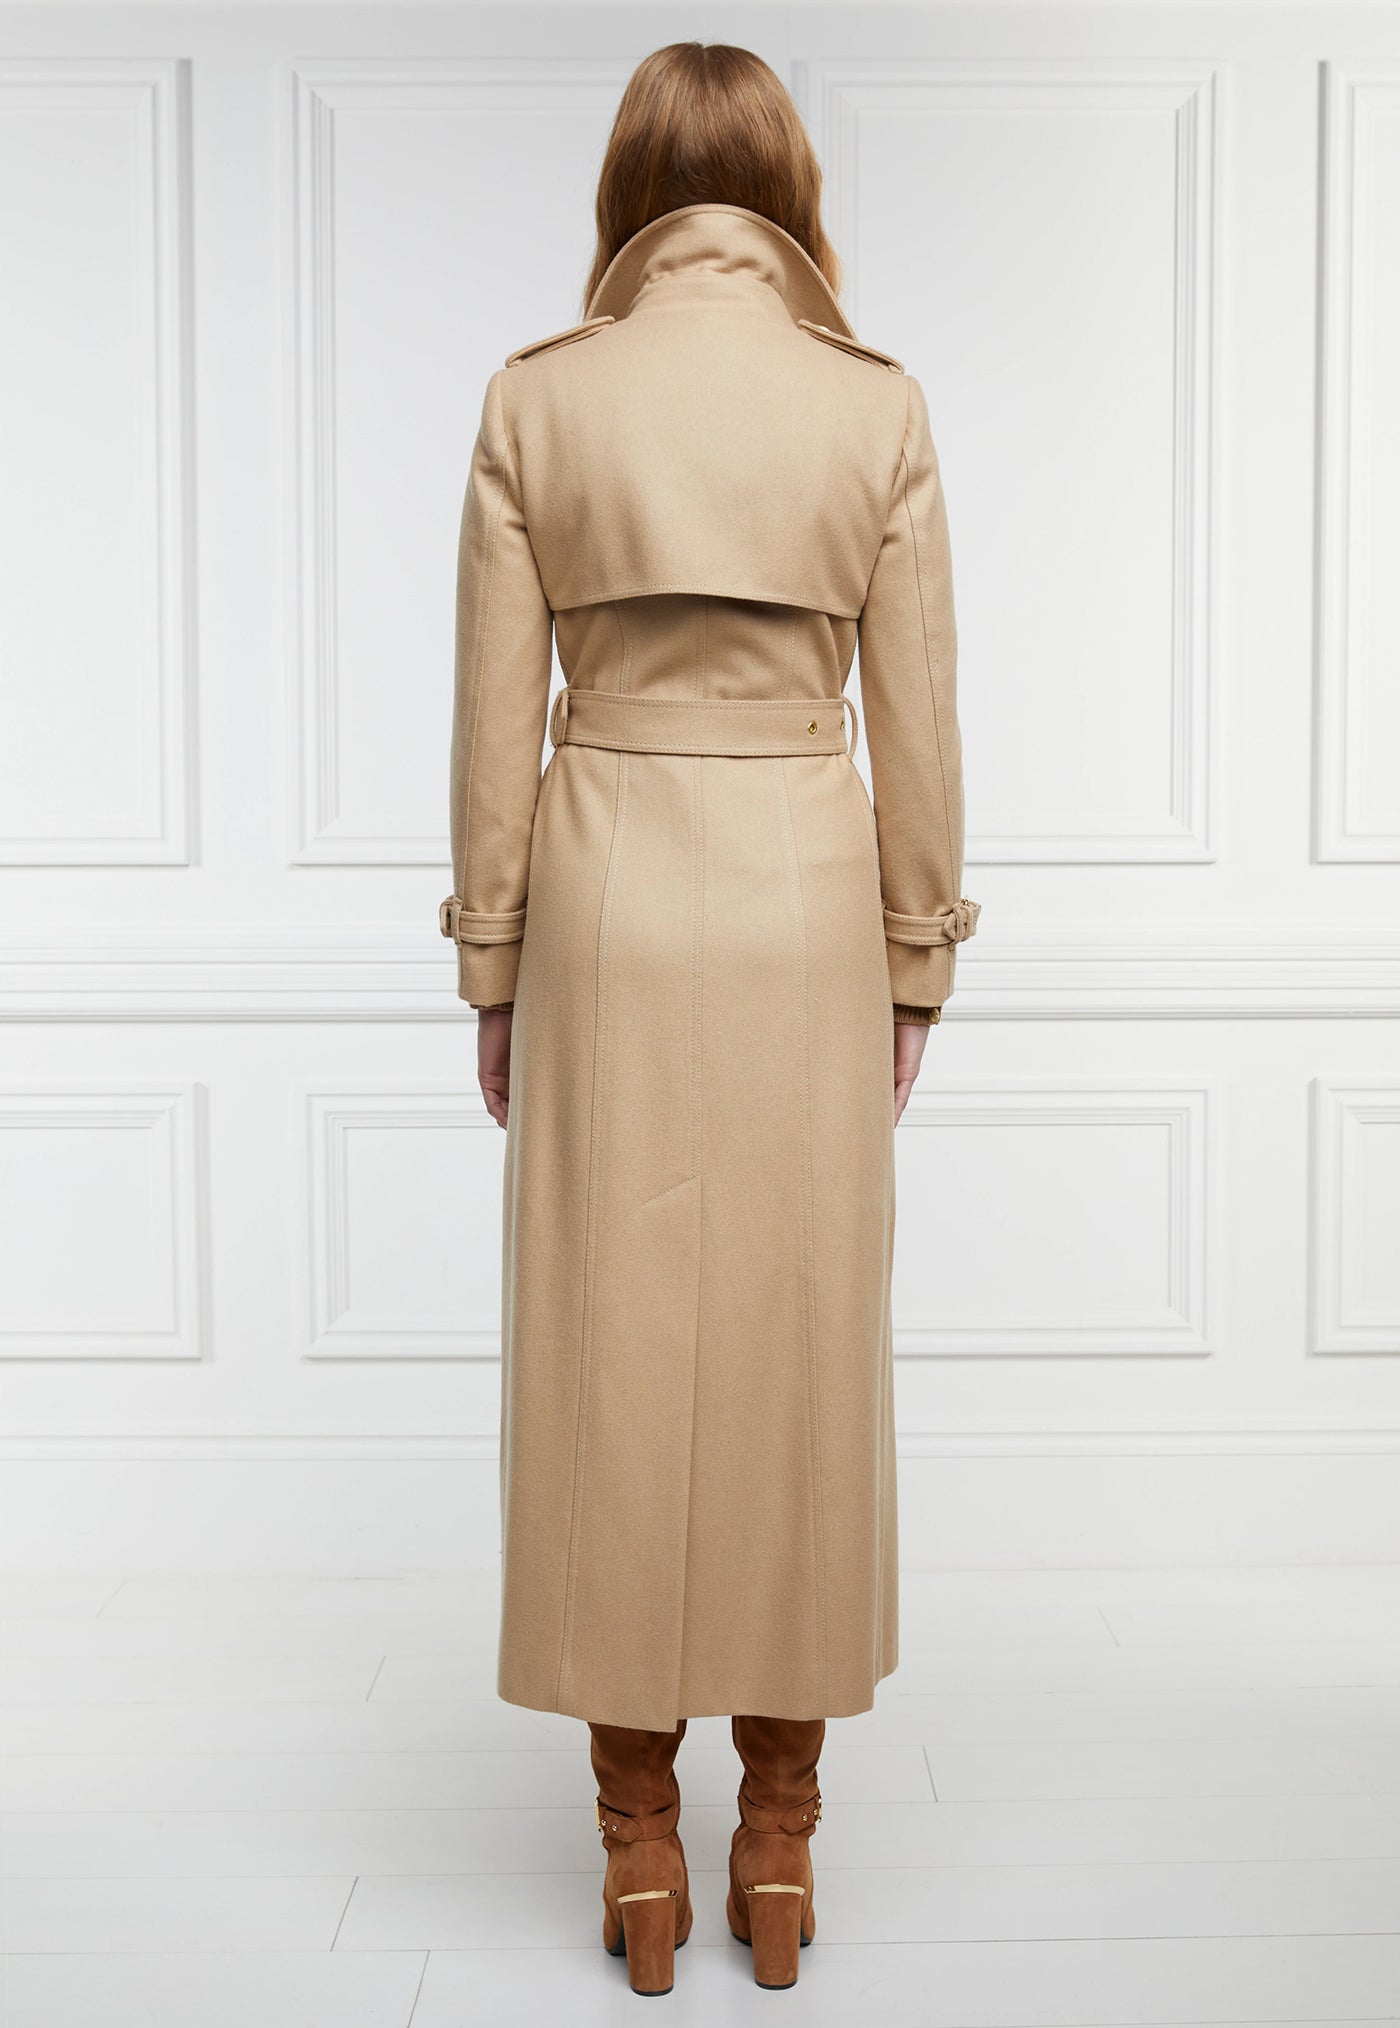 Marlborough Trench Coat Full Length - Camel sold by Angel Divine